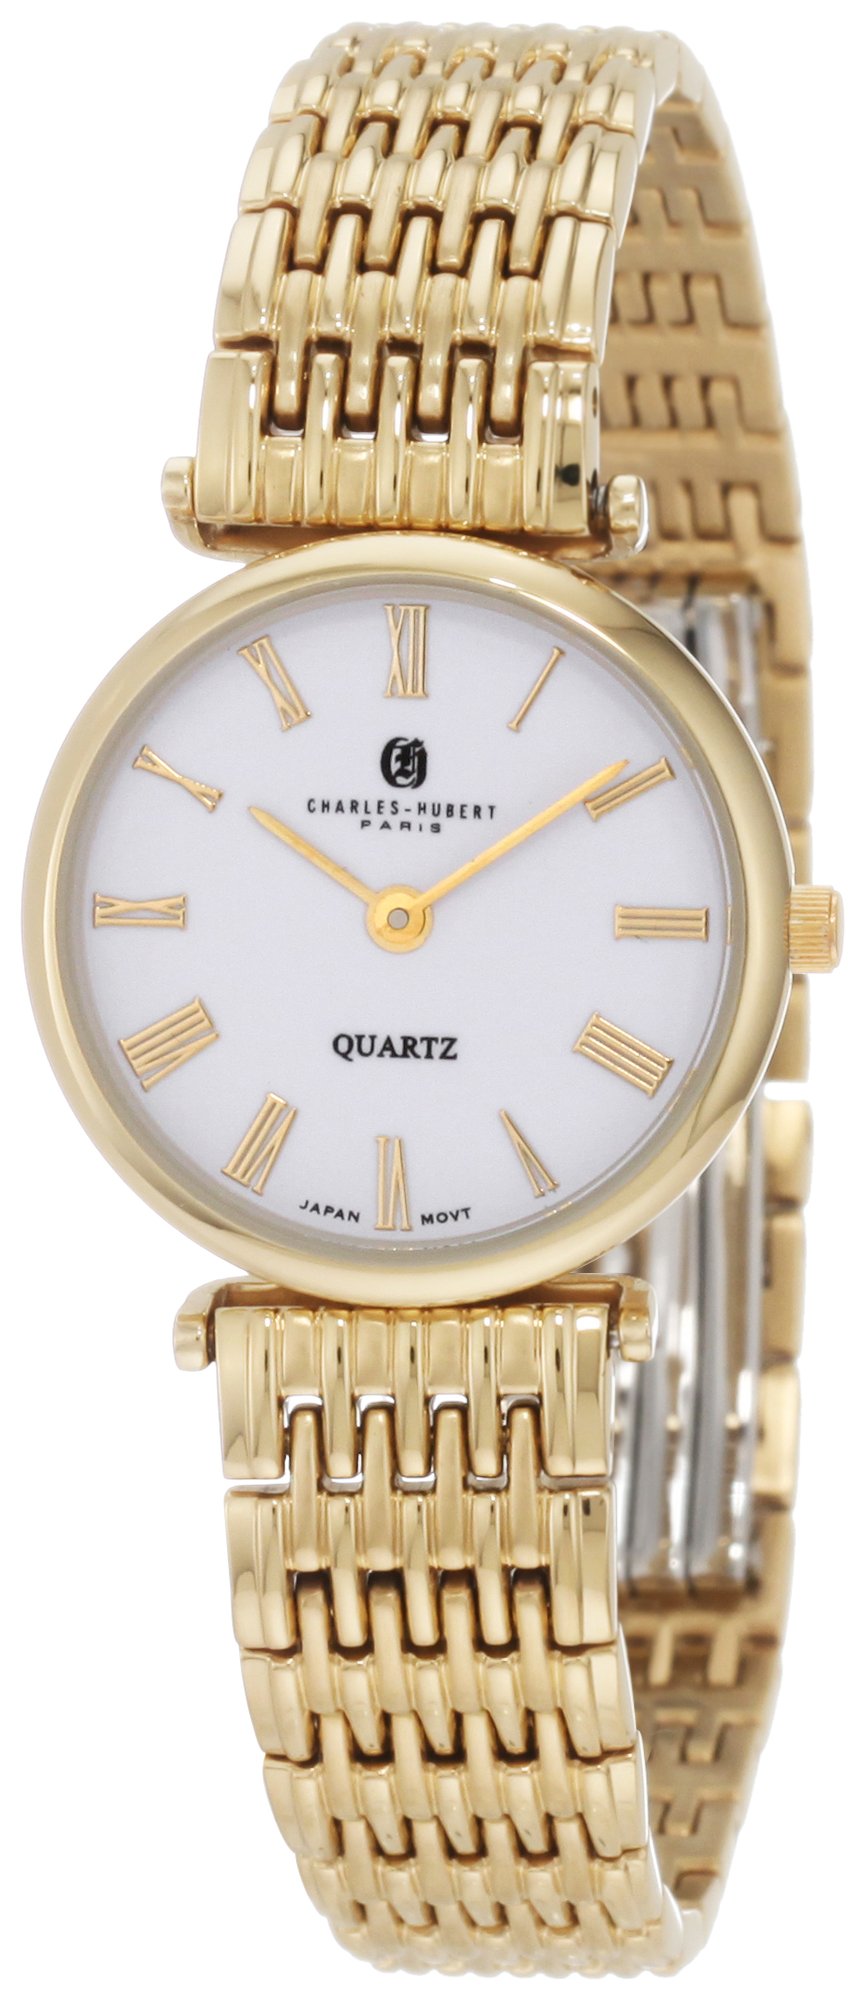 Charles-Hubert, Paris Women's 6798 Premium Collection Gold-Plated Stainless Steel Watch